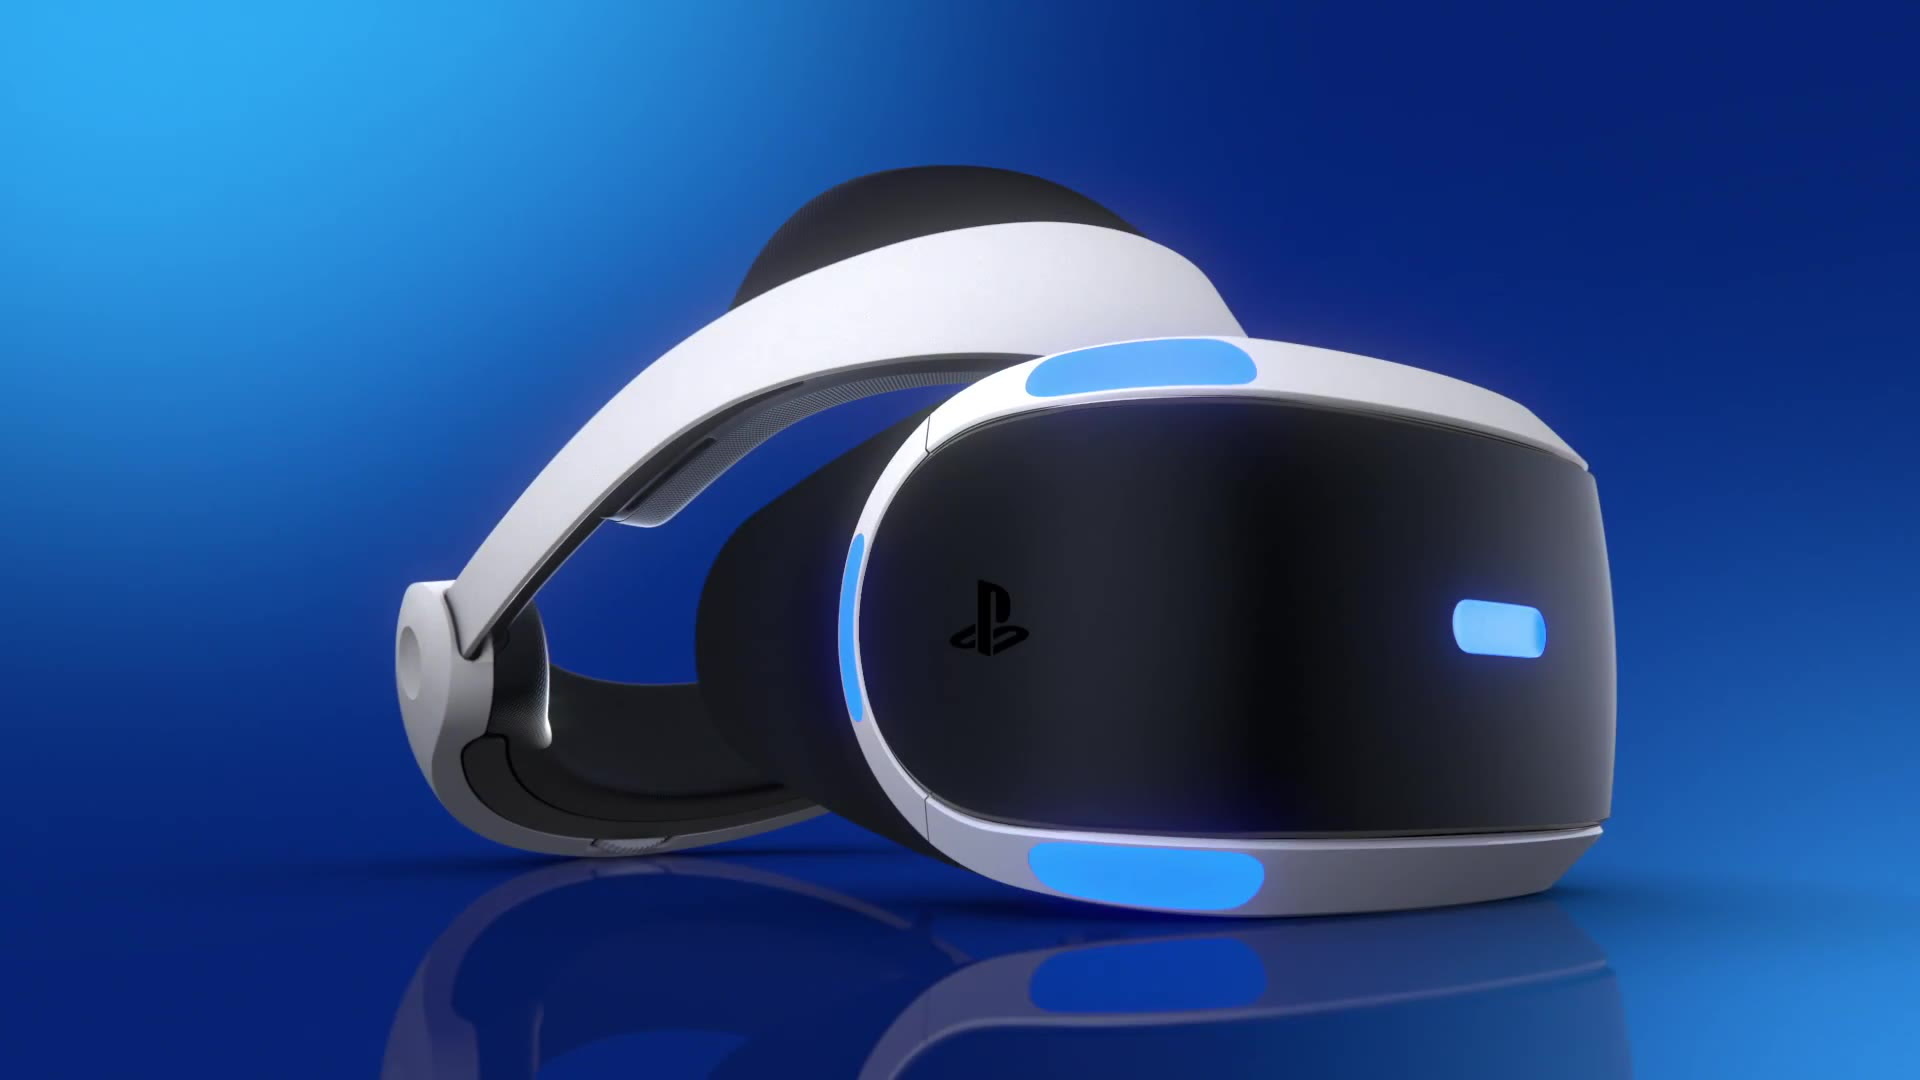 Sony Says It Wants To Make Advancements With Psvr